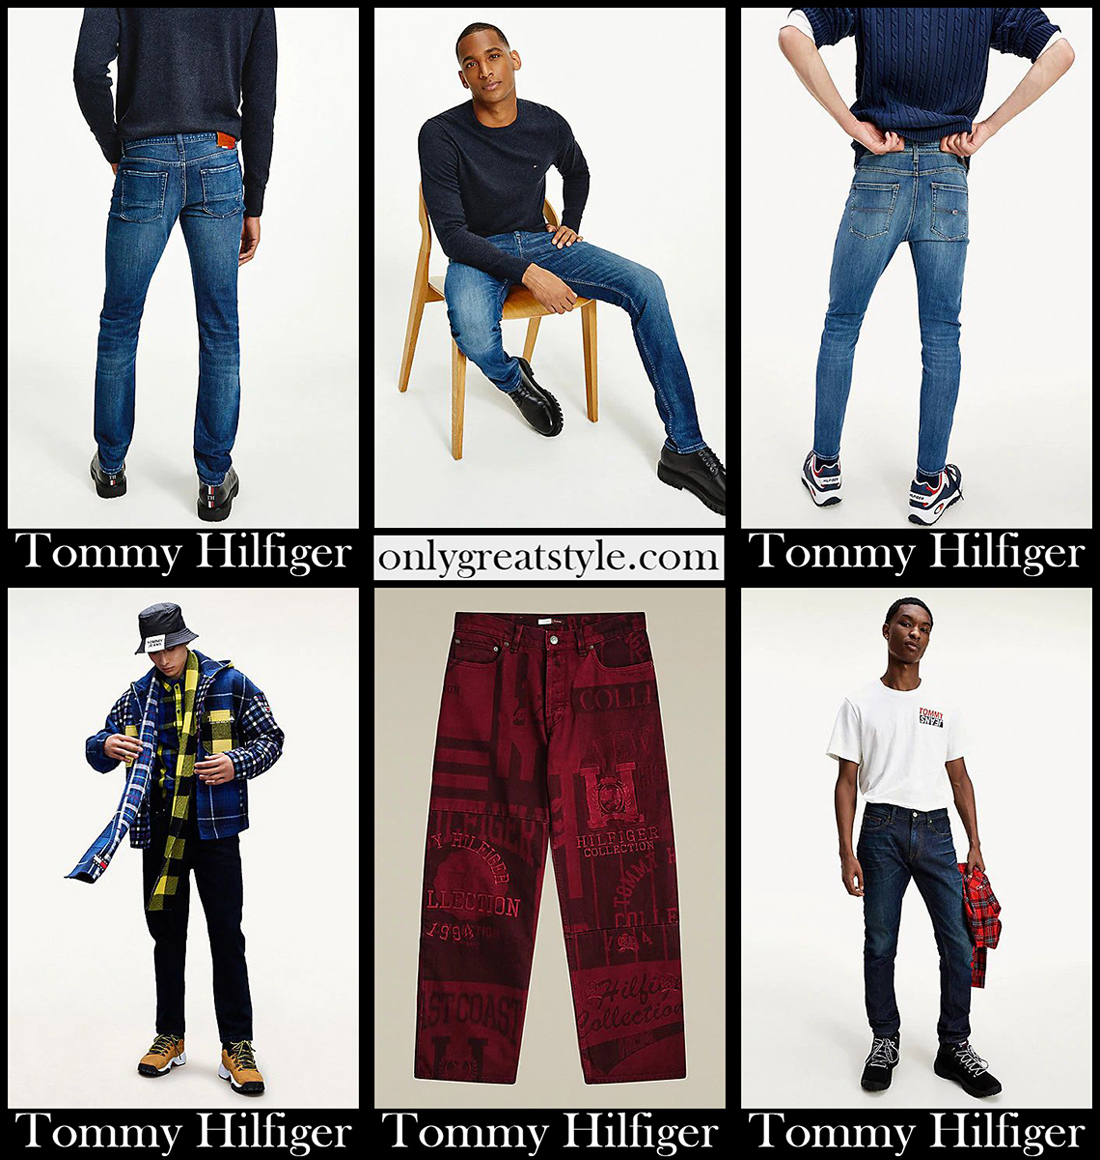 Tommy Hilfiger jeans 2021 new arrivals mens clothing